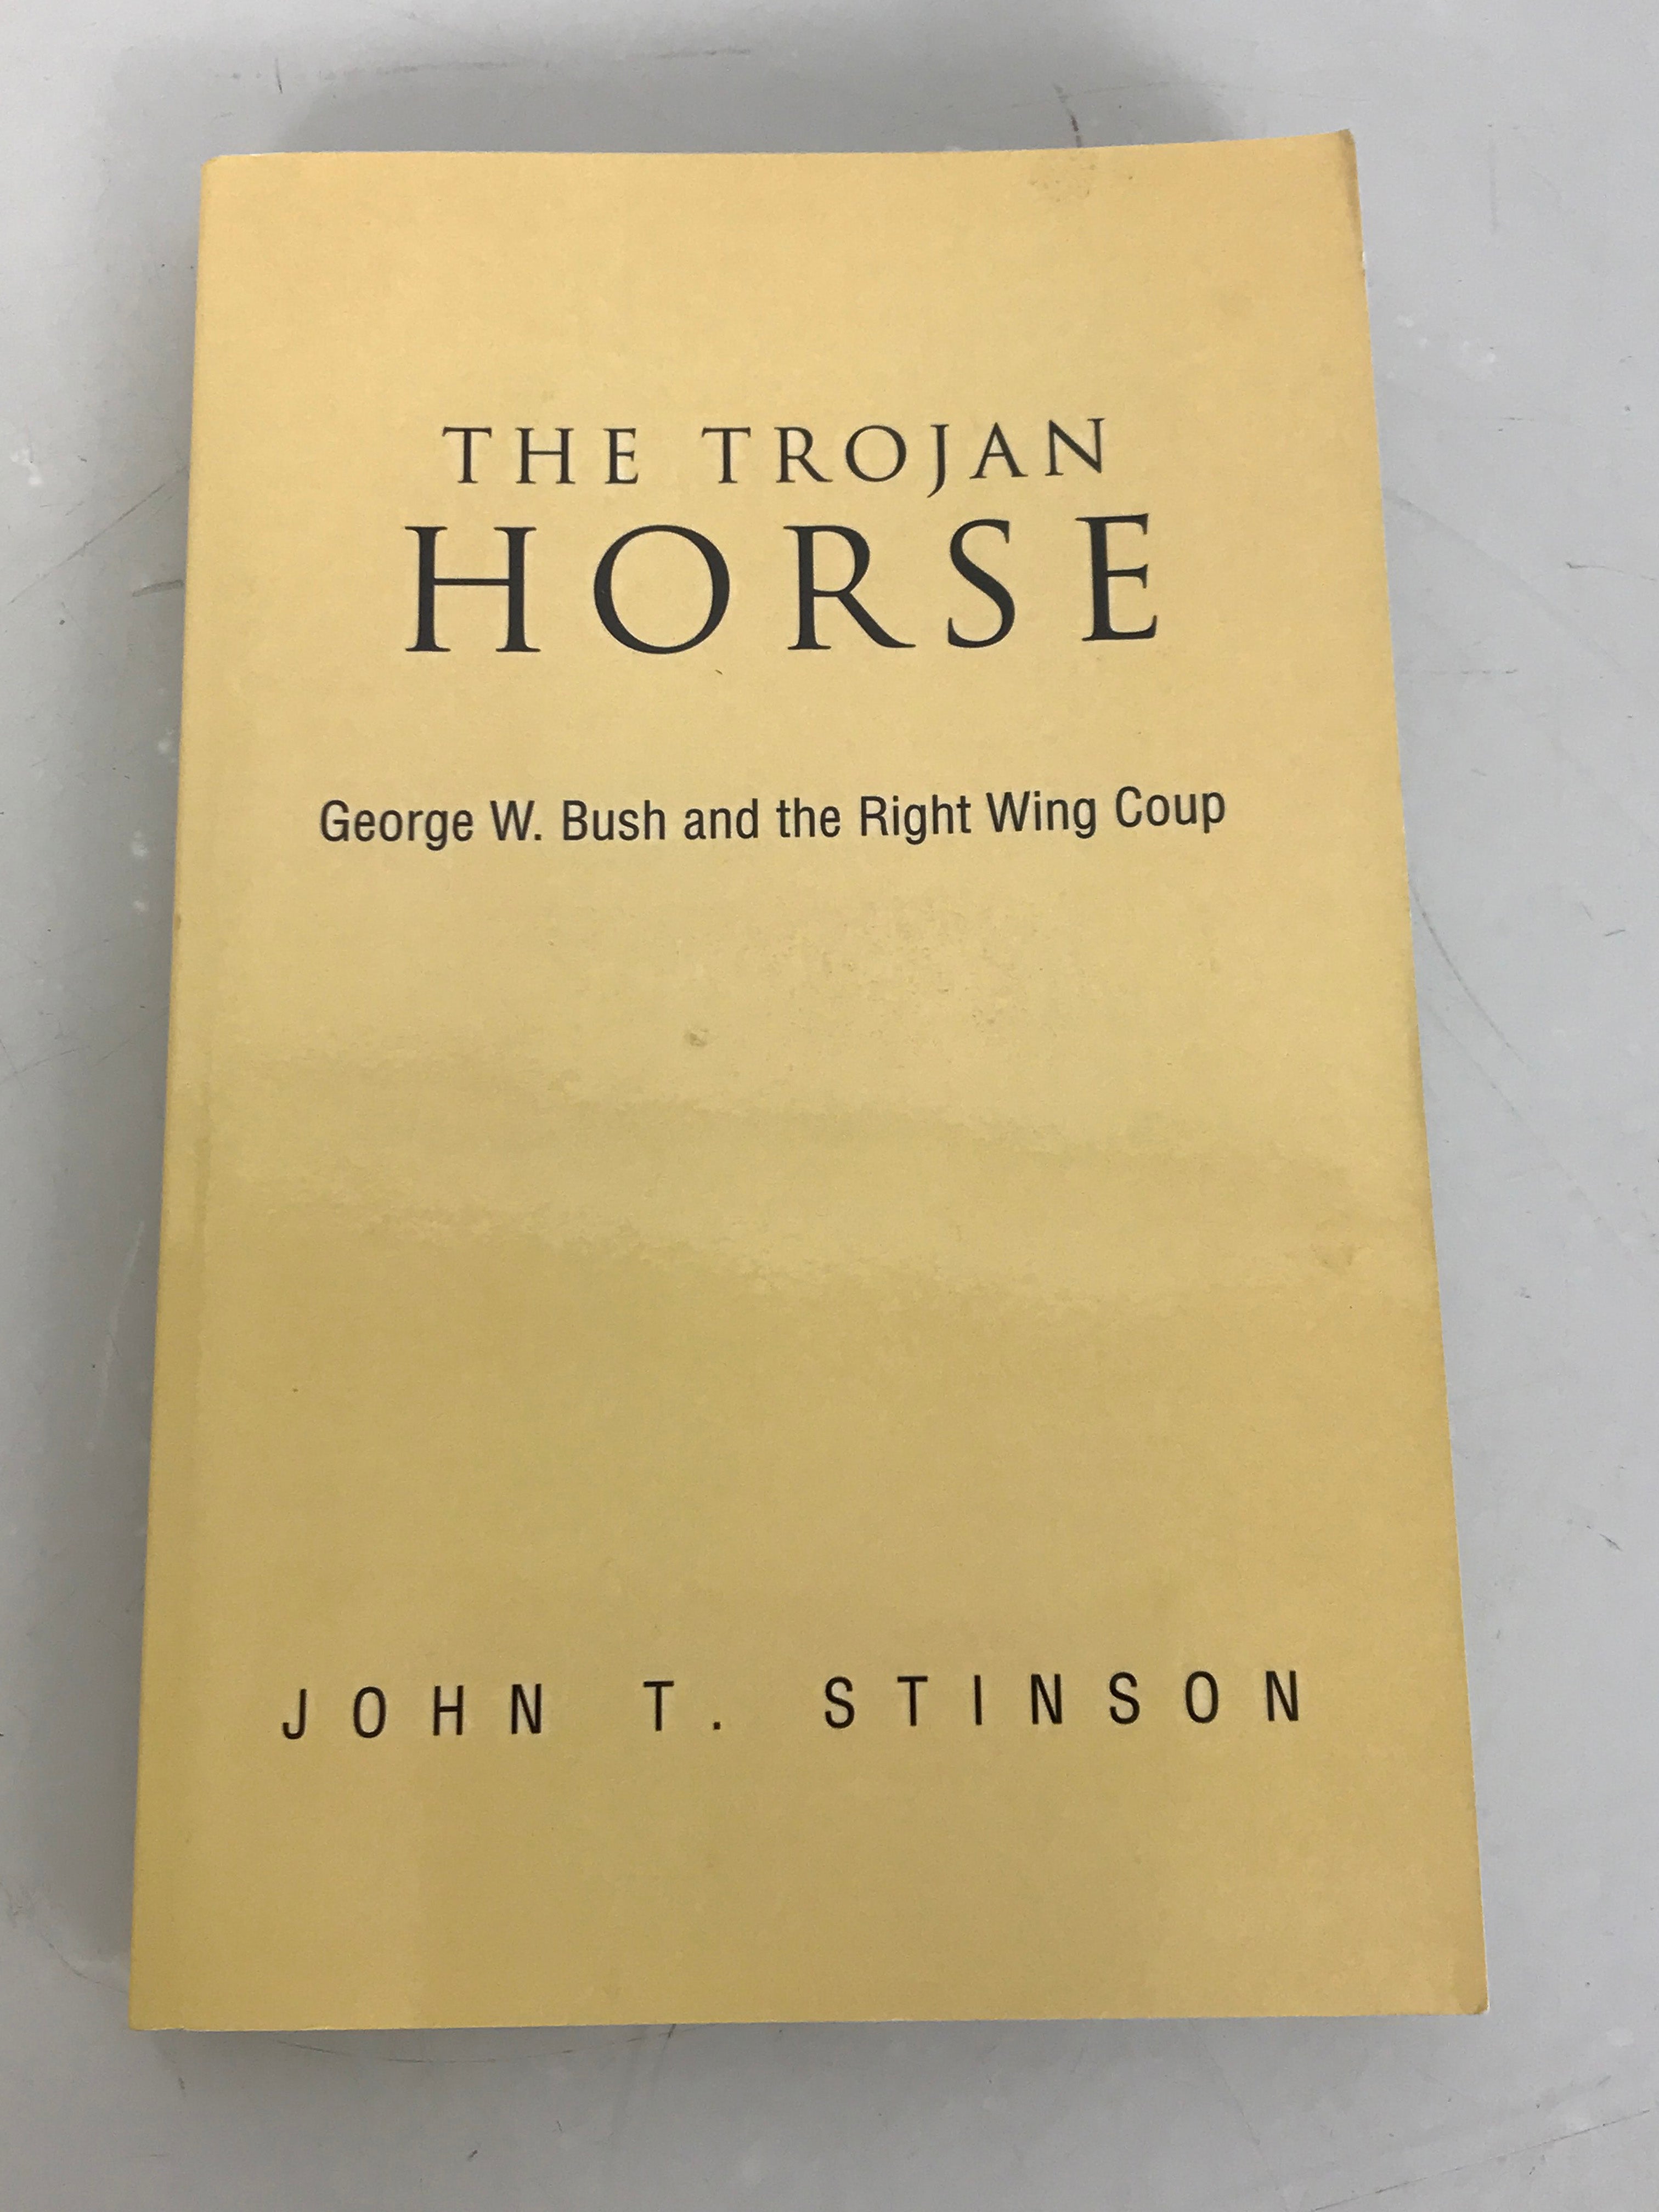 The Trojan Horse George W. Bush and the Right Wing Coup by Stinson Signed 2004